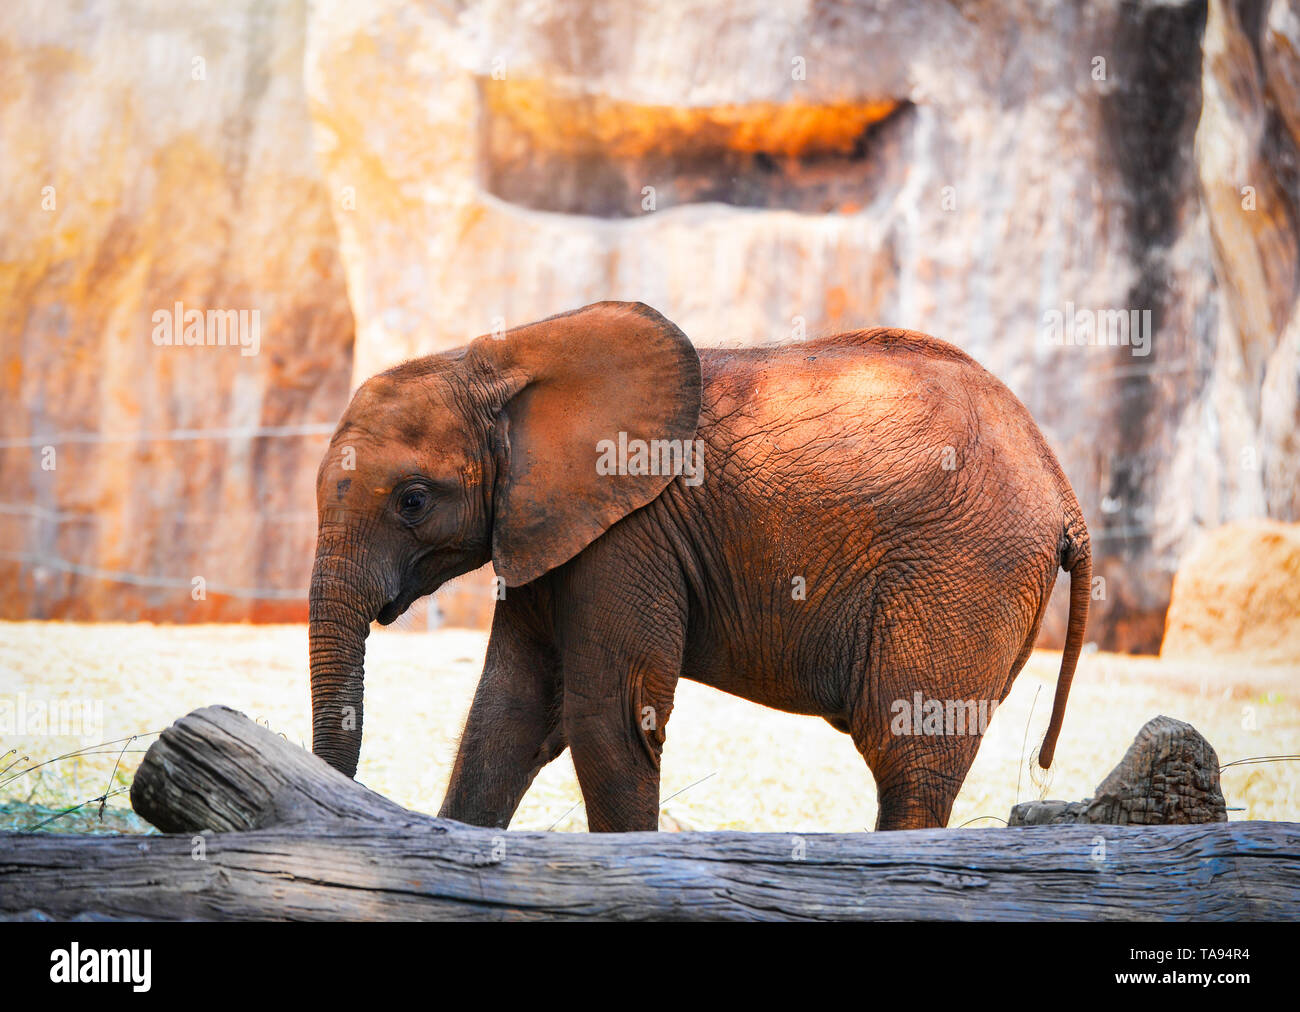 Cute baby elephant / baby elephant with mud on skin live on farm in the  wildlife sanctuary - young baby elephants playing on ground Stock Photo -  Alamy